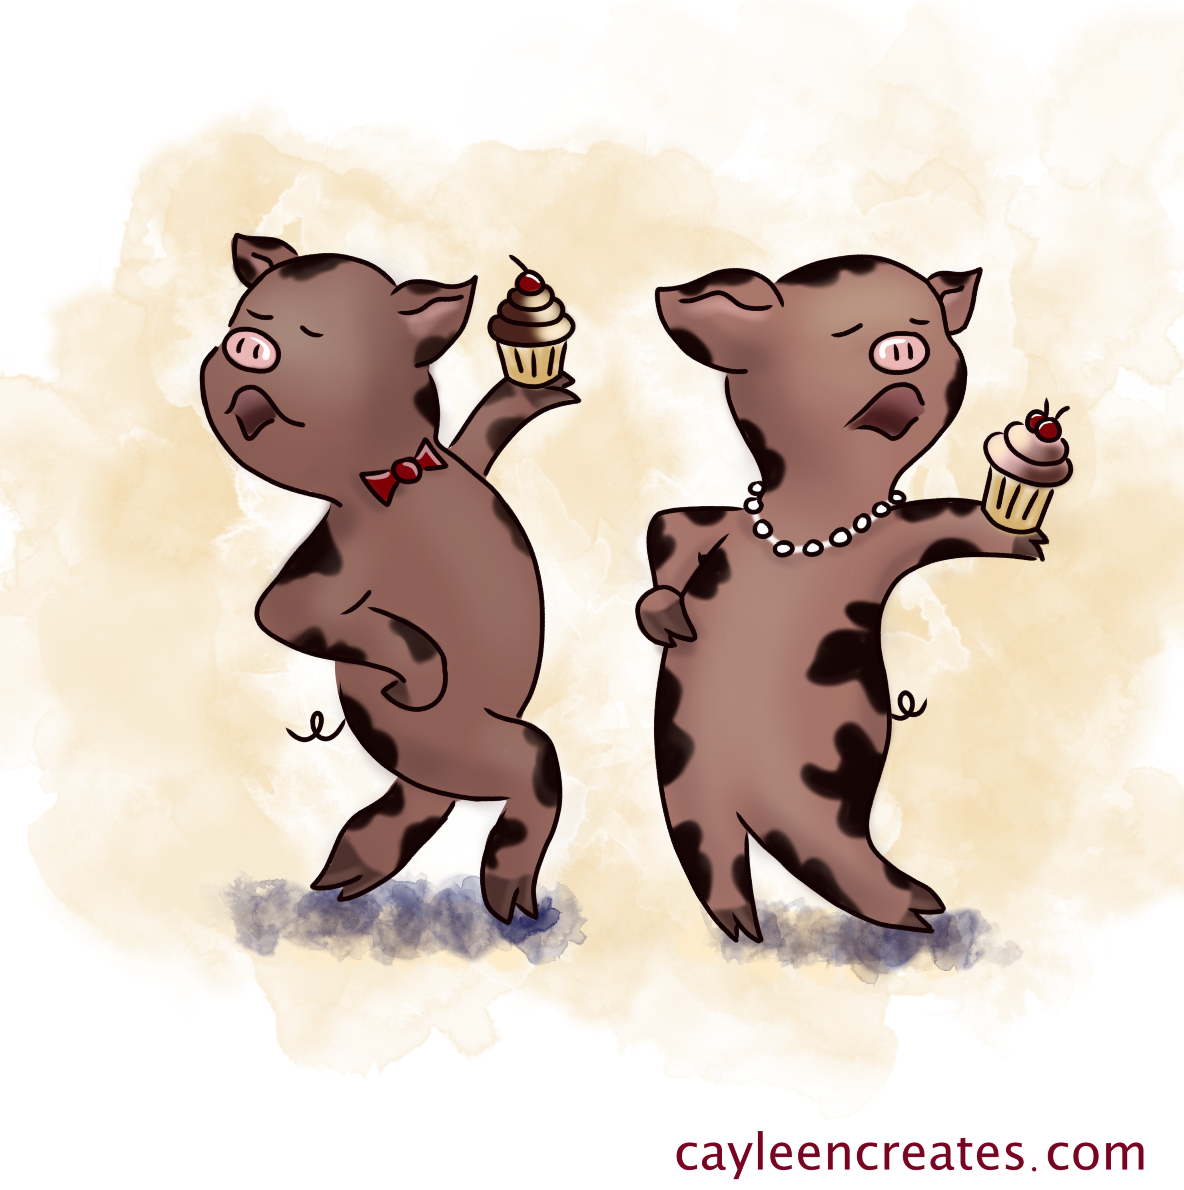 snobby pigs and cupcakes